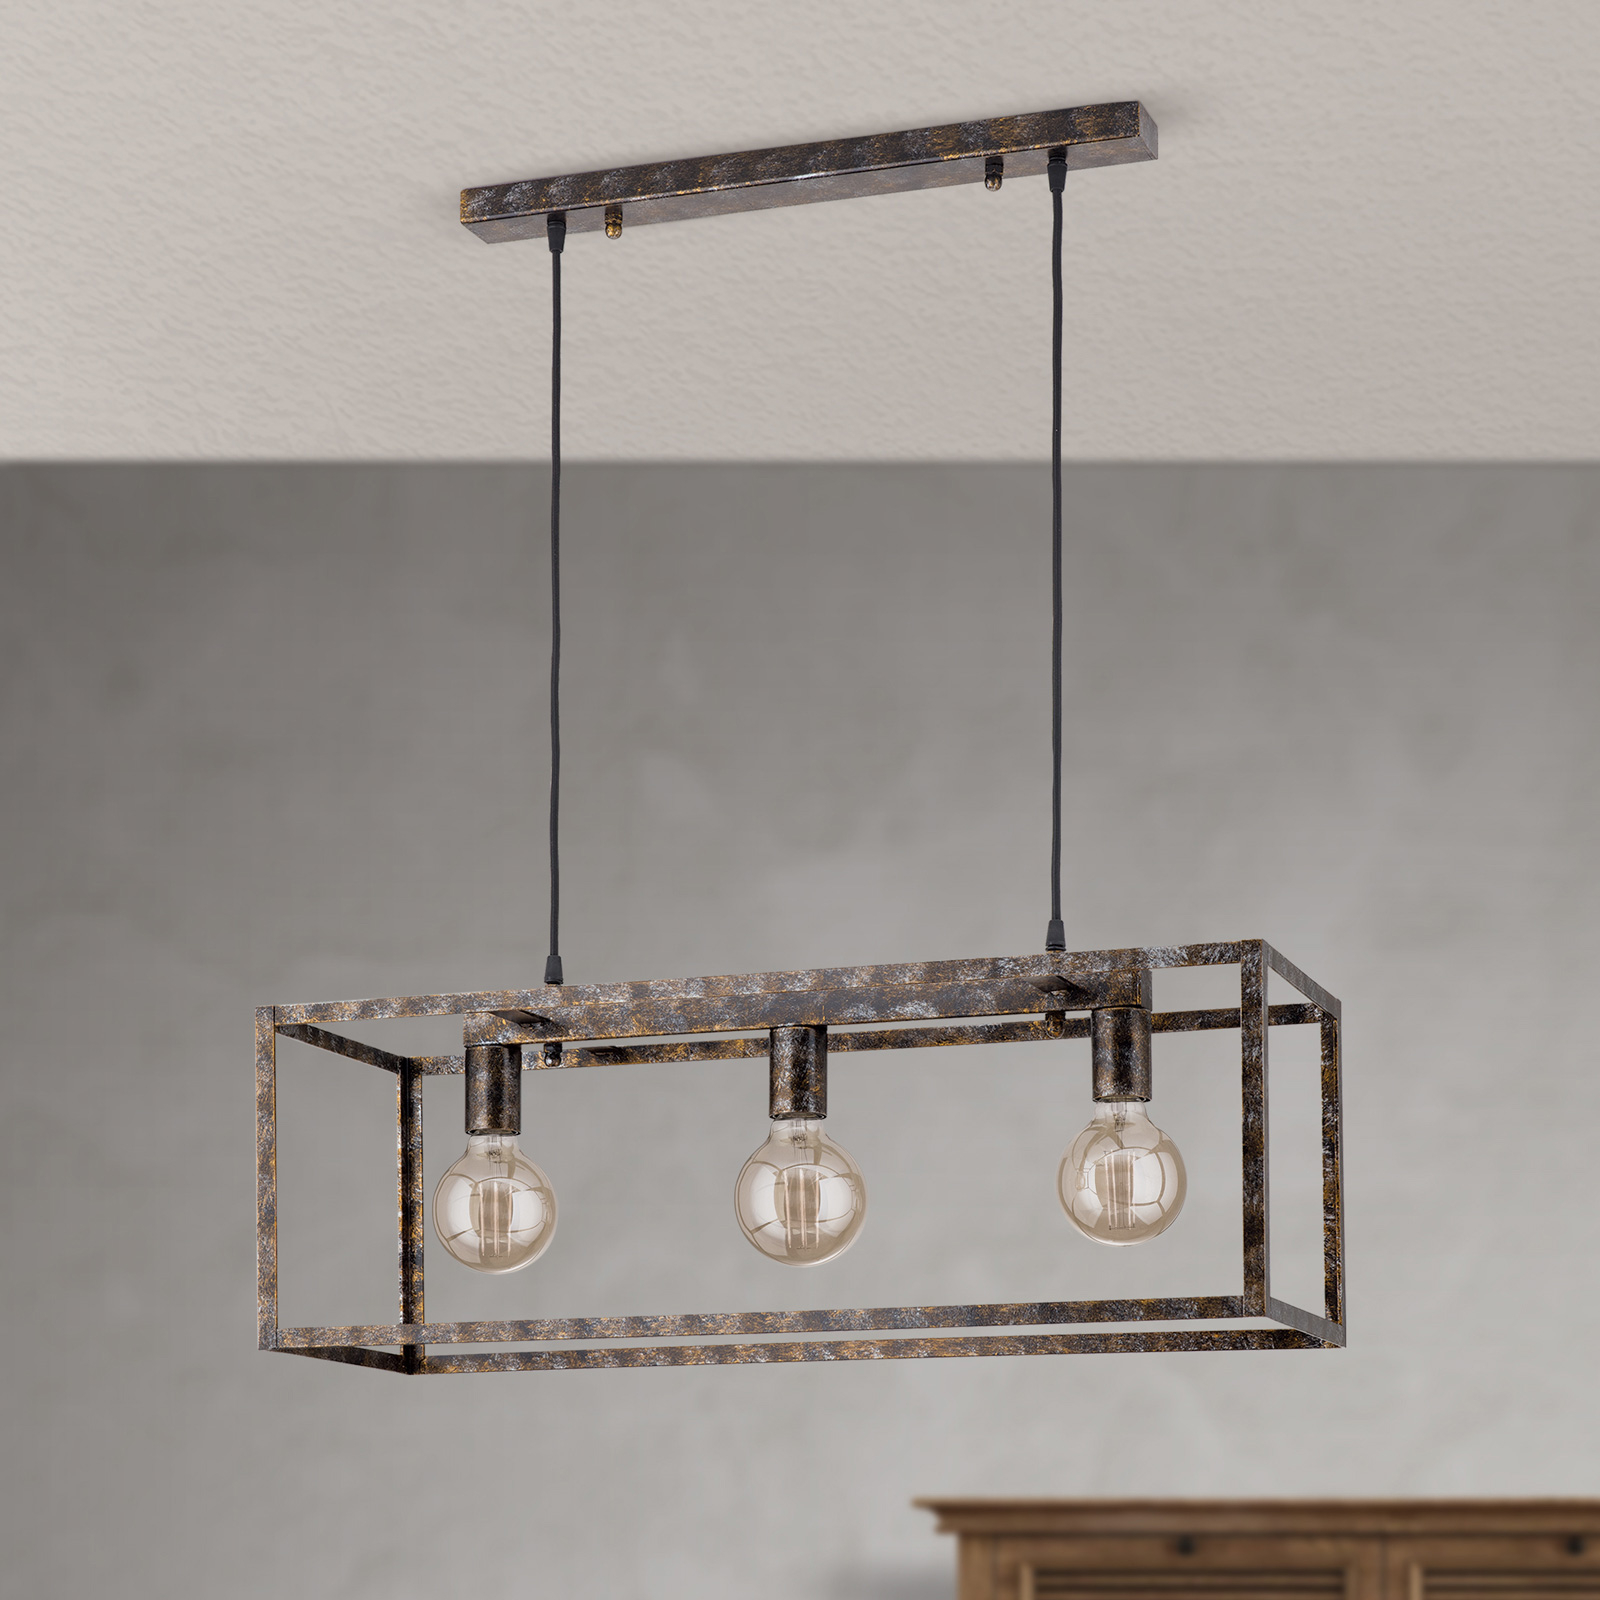 Hanglamp Cage in roest-optiek 3 lamps